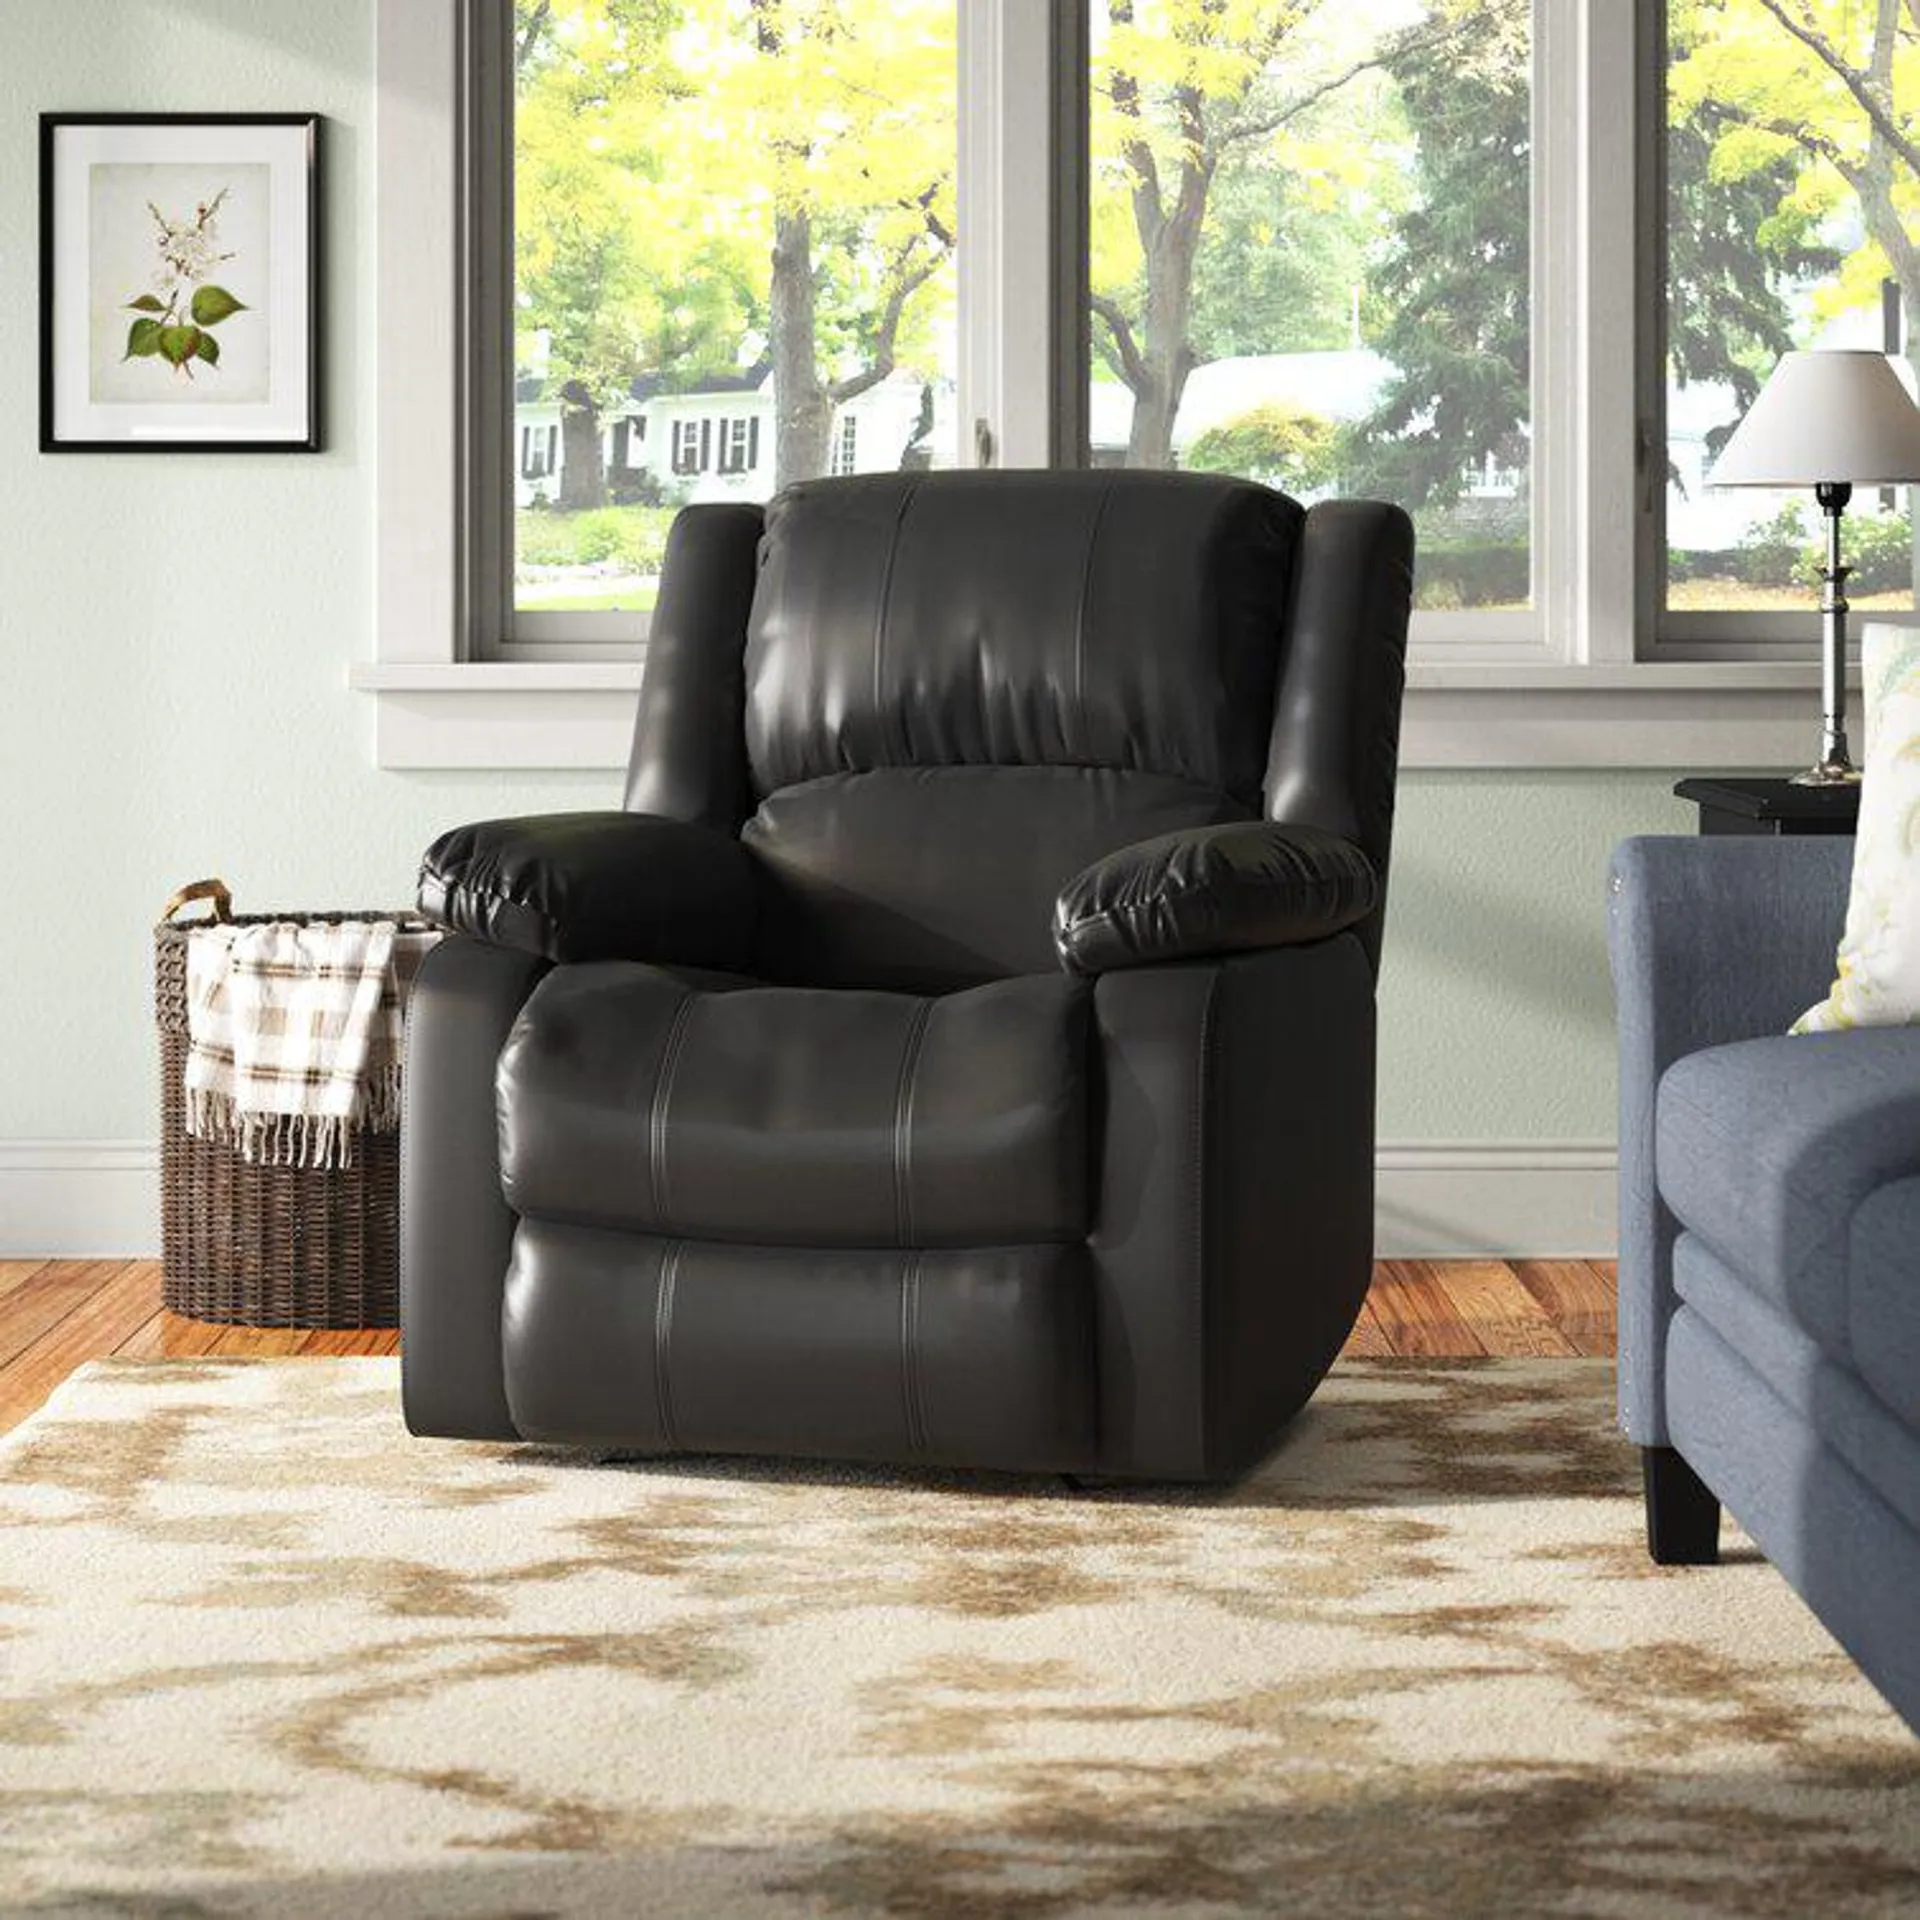 Sanie 37.8" Faux Leather Manual Recliner